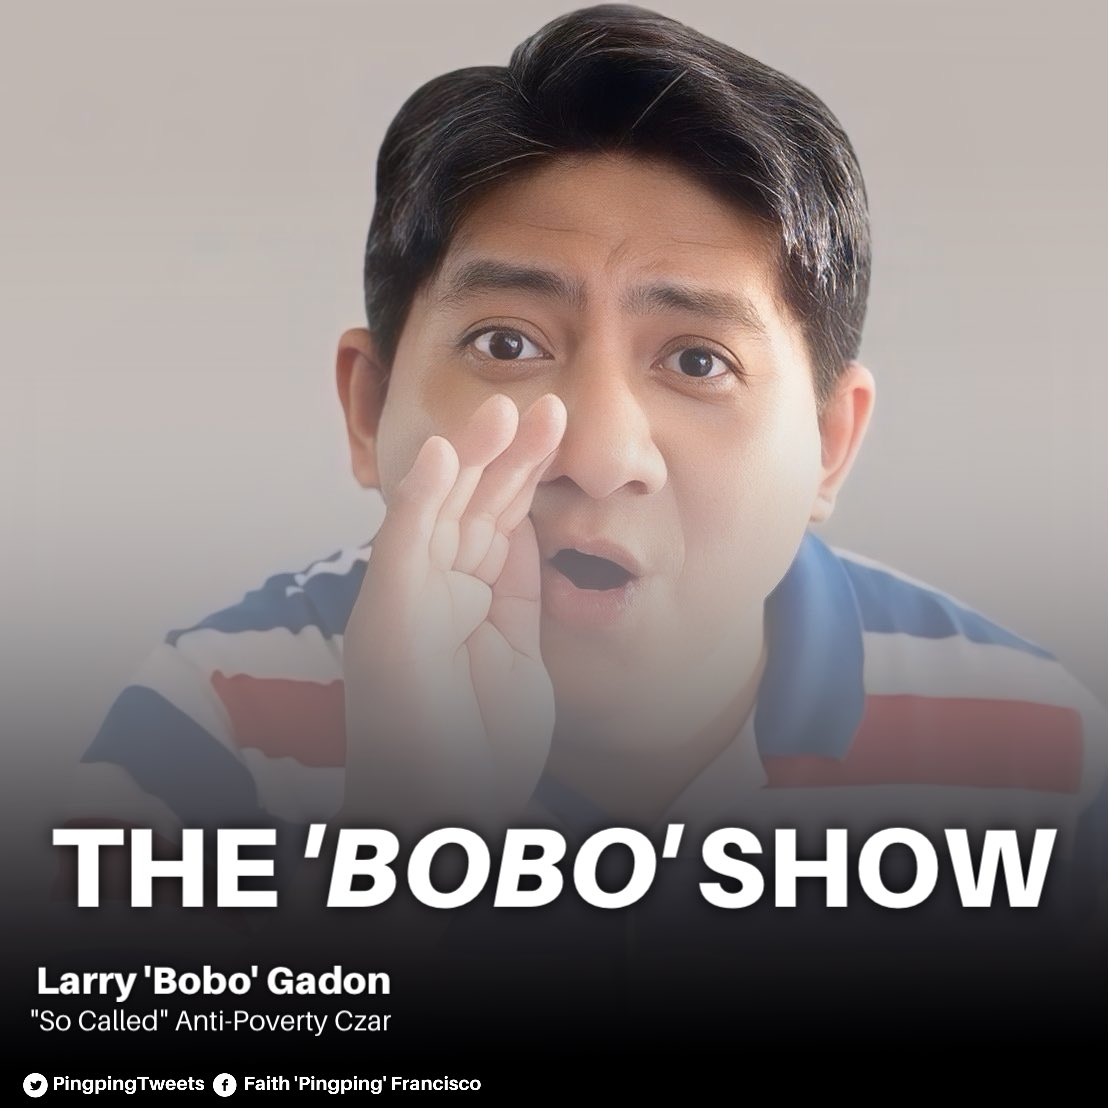 Presidential anti-poverty czar and disbarred lawyer Larry ‘𝘽𝙊𝘽𝙊’ Gadon will headline his own live show on @PTVph called The ‘𝘽𝙊𝘽𝙊’ Show
@LarryGadonskie